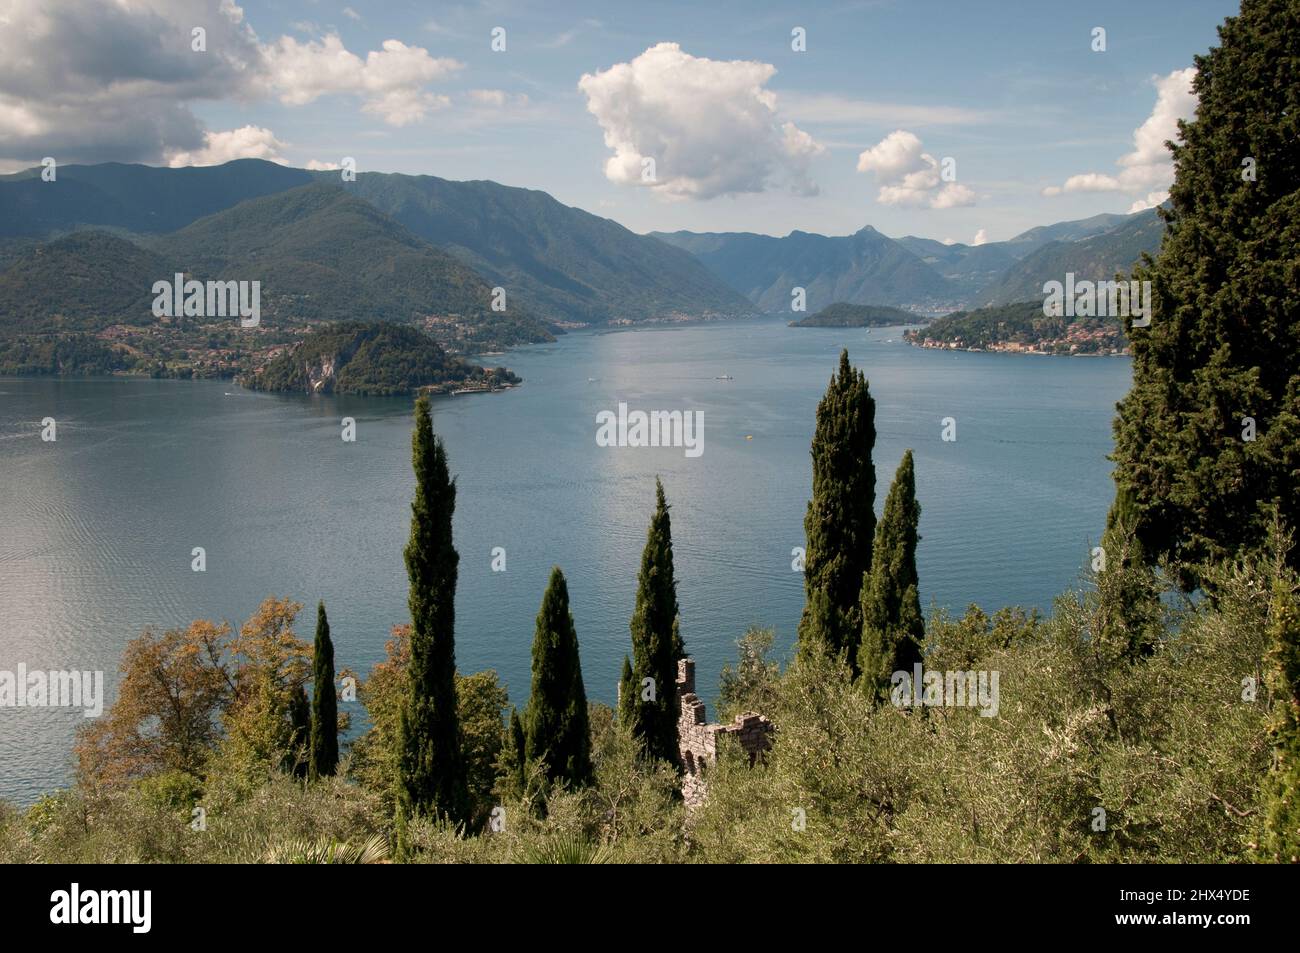 Back Roads Northern Italy - Drive 4, Back Roads Northern Italy, Italy, Lombardy, Lake Como, Castello de Vezio, lake views from Castle Stock Photo